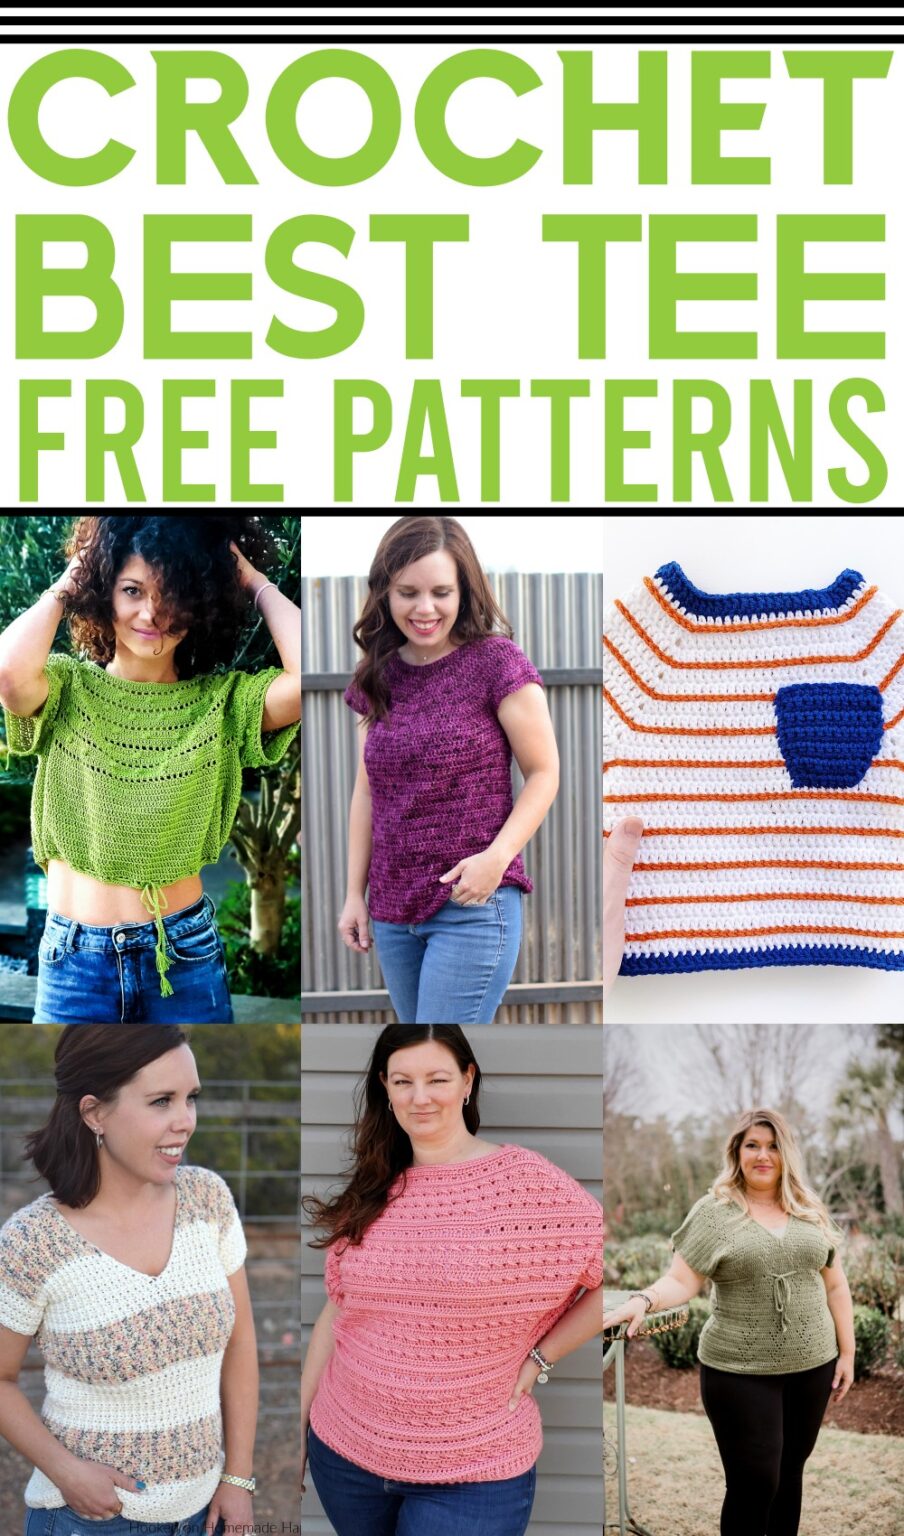 20 Top Crochet Tee Patterns For Ladies To Try This Summer Season - Free ...